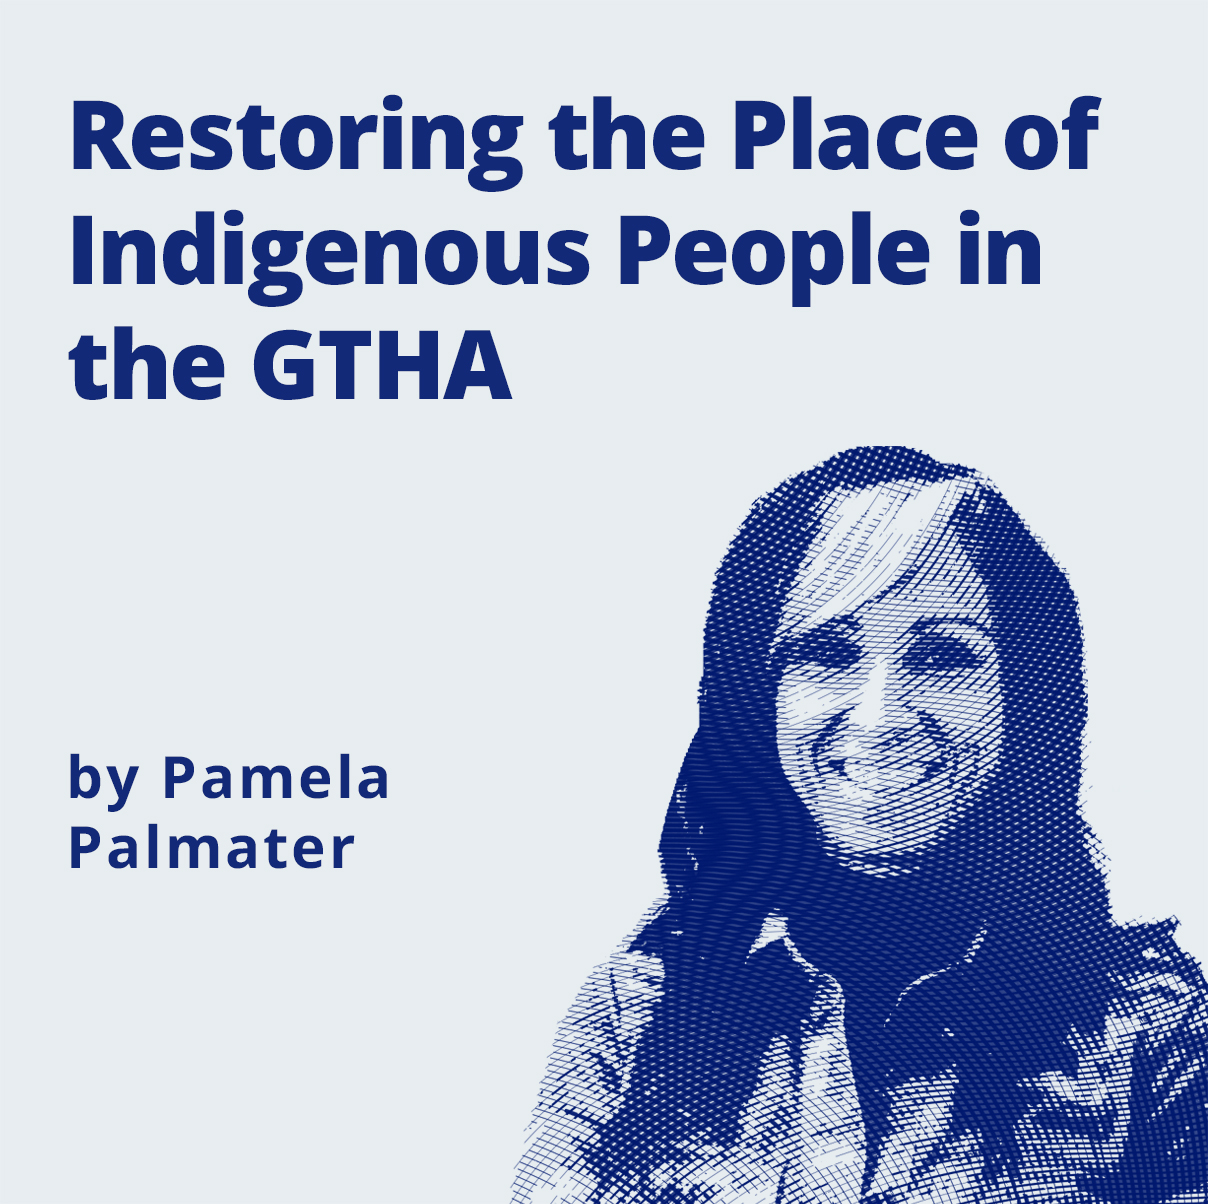 Restoring the Place of Indigenous People in the GTHA by Pamela Palmater